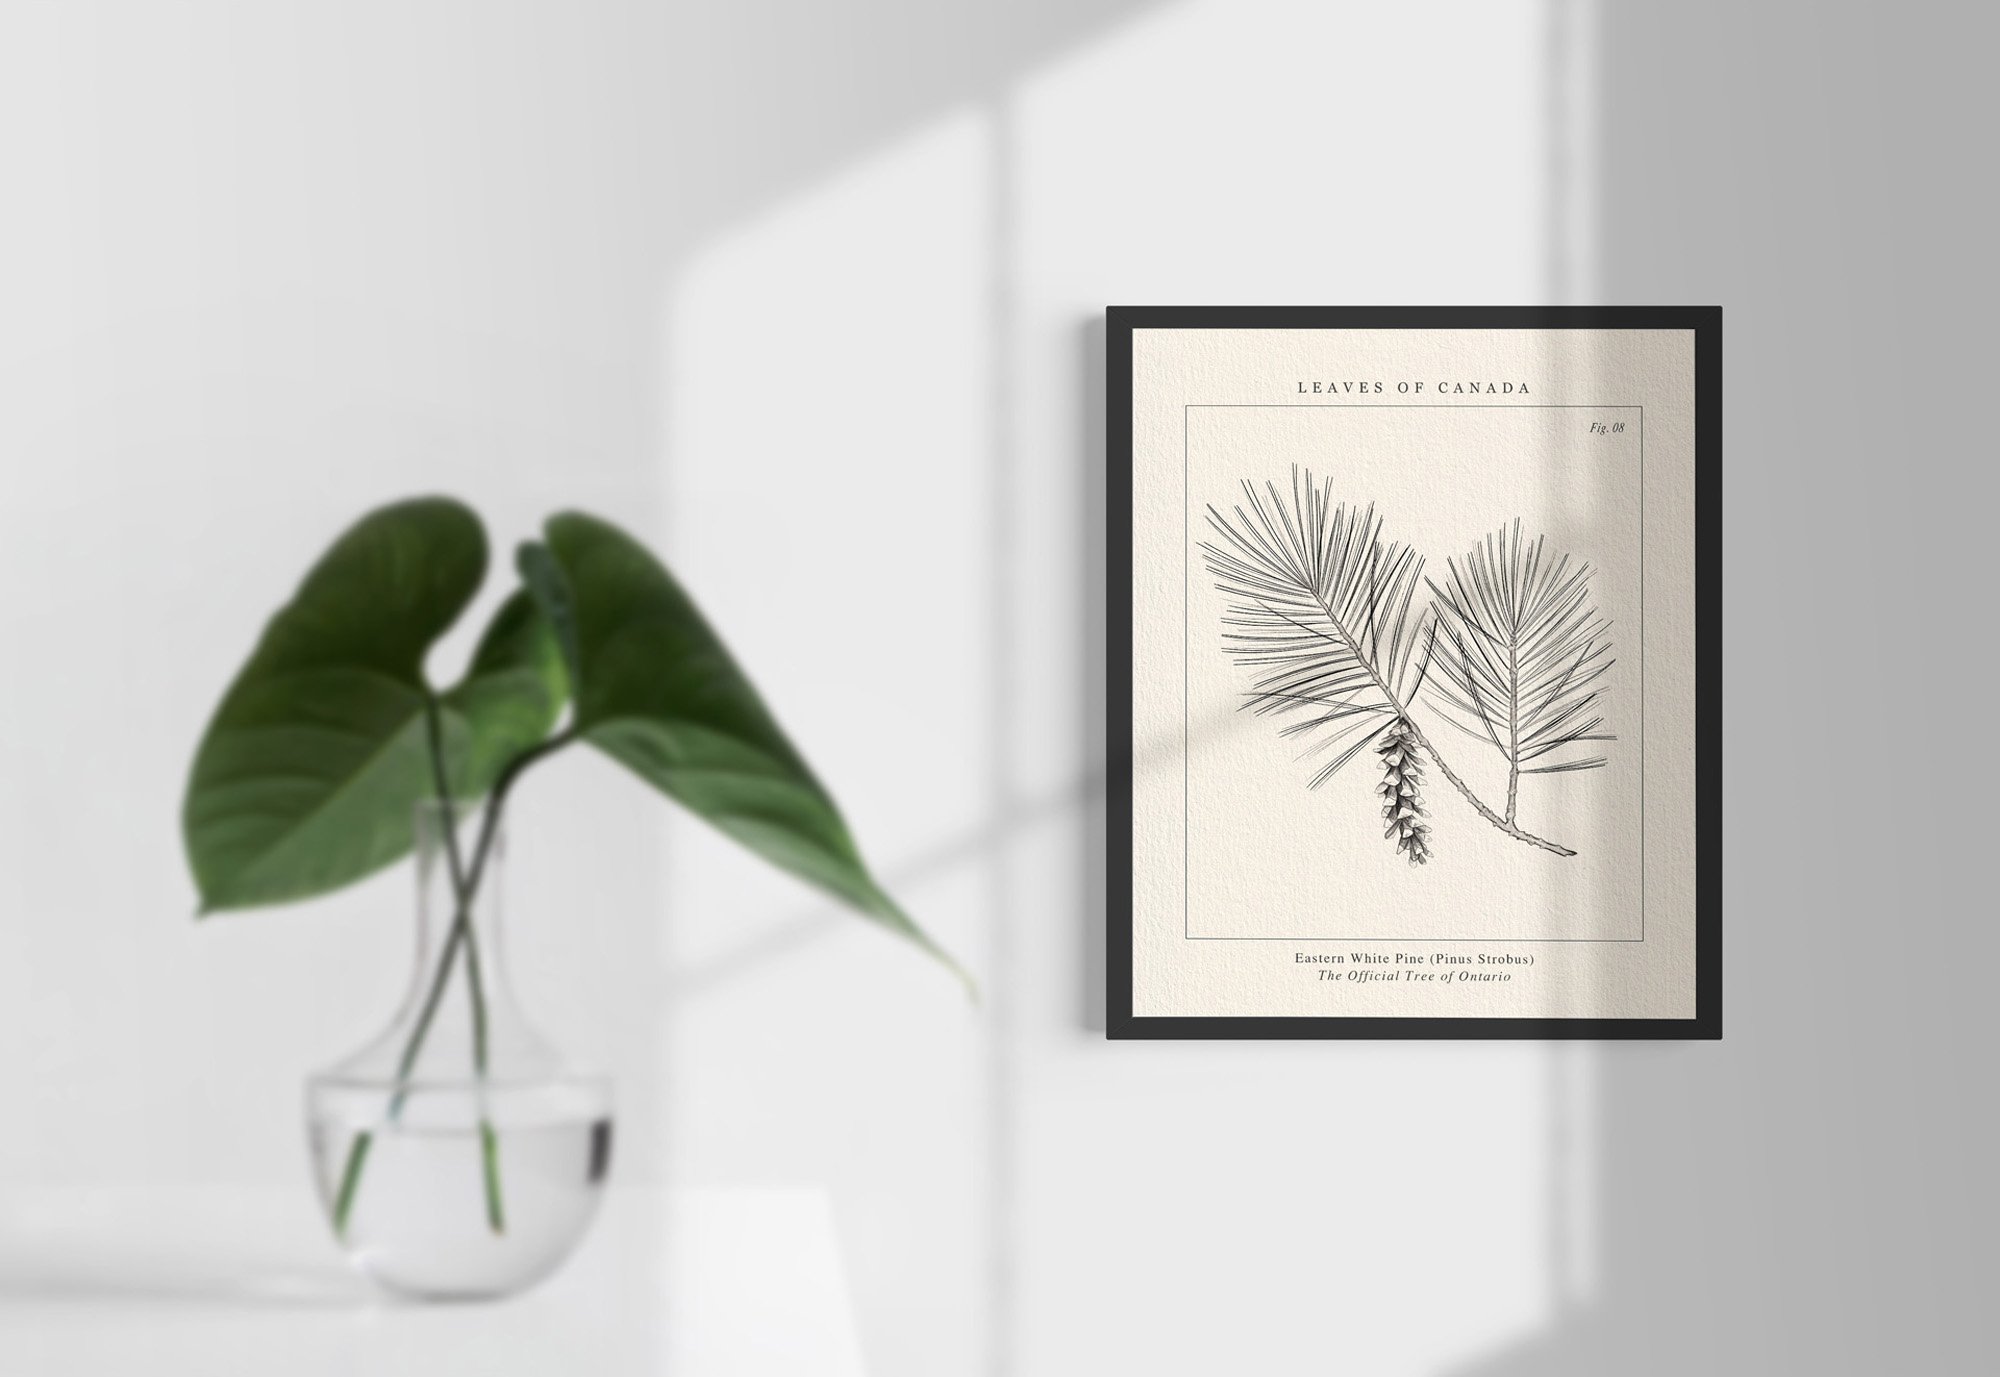 Hanging Ontario Eastern White Pine botanical wall art with black wooden frame on a light background with a vase with leaves in front